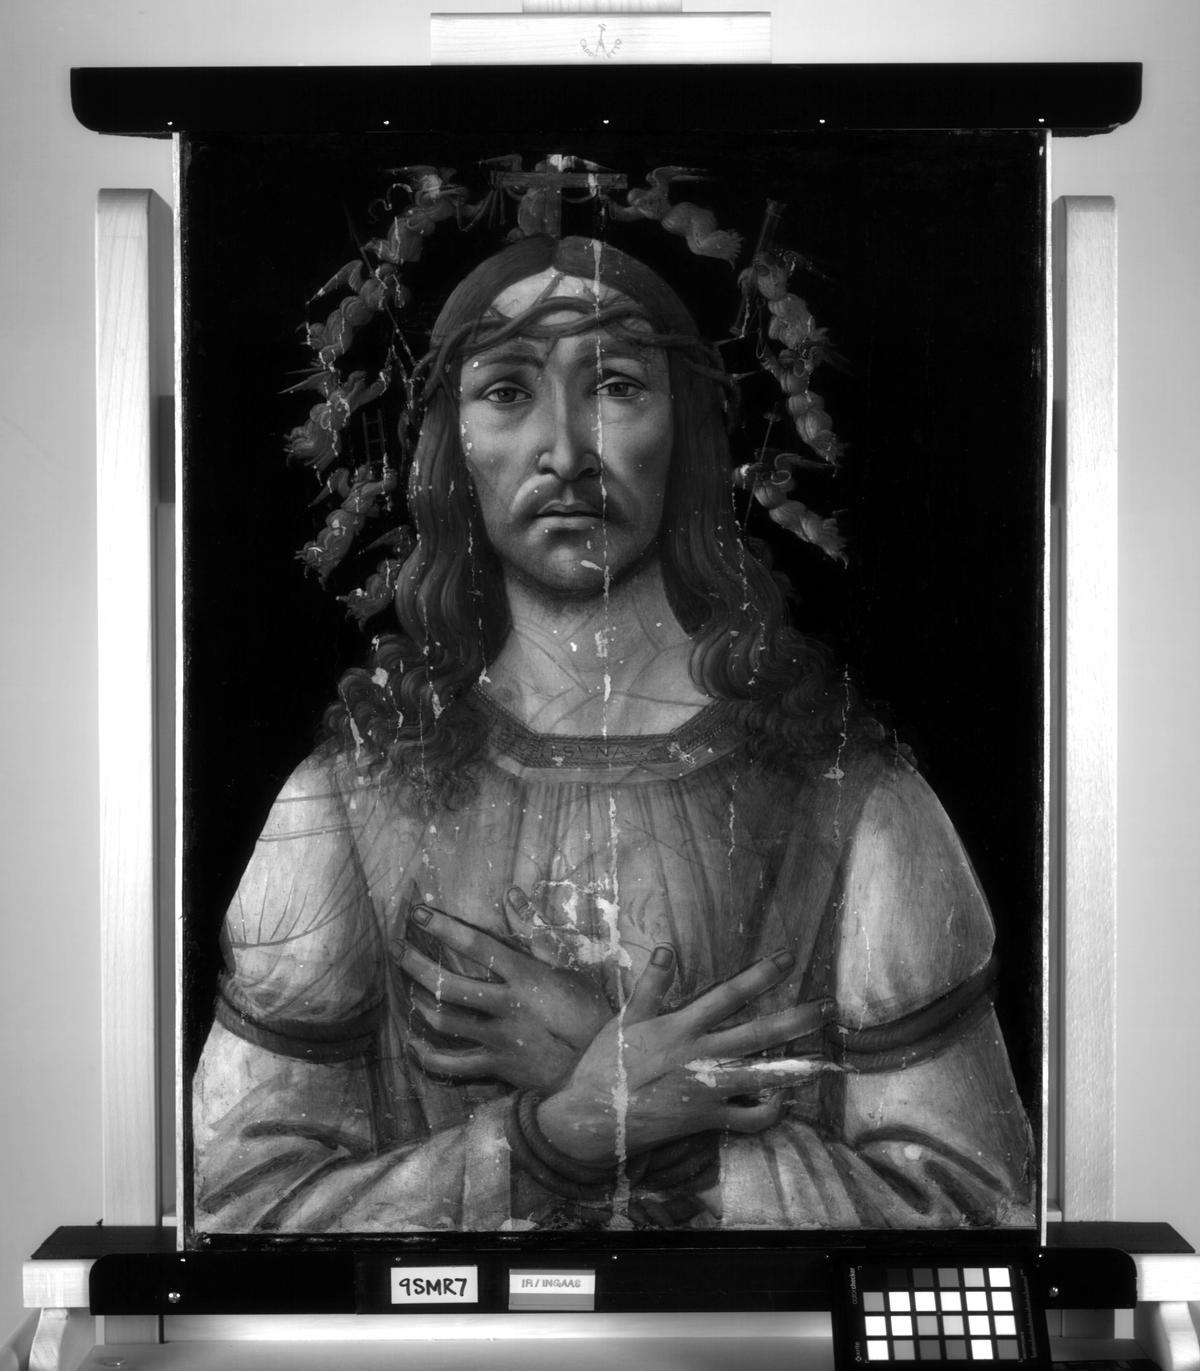 An infrared image of the Man of Sorrows, showing the faint outline of a Madonna and Child underneath

Courtesy of Sotheby's